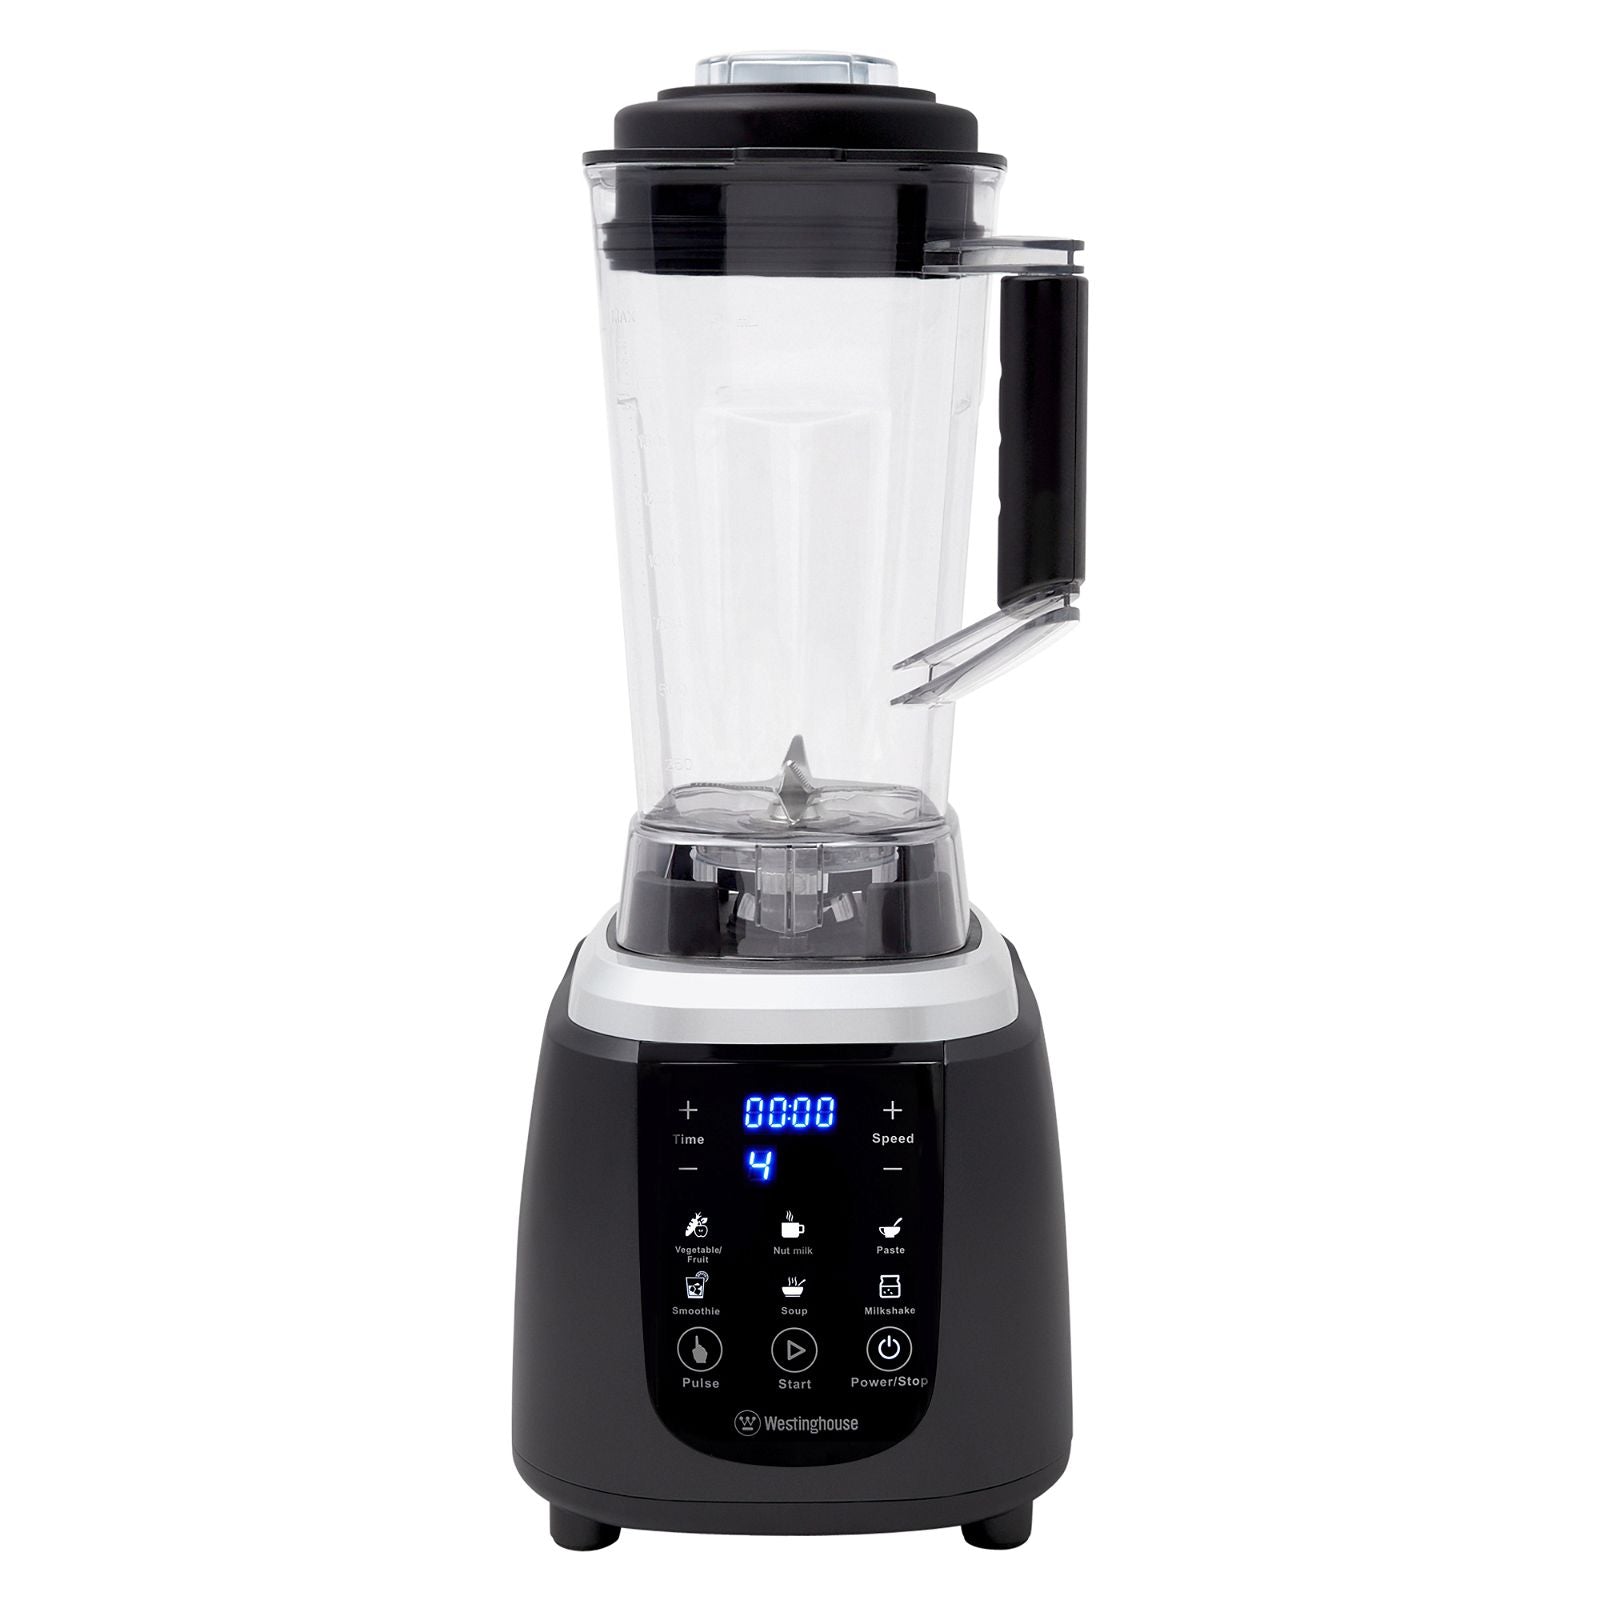 Westinghouse Blender 1250W Digital Control 2L BPA Free Plastic Jug-#product_category#- Distributed by:  under license